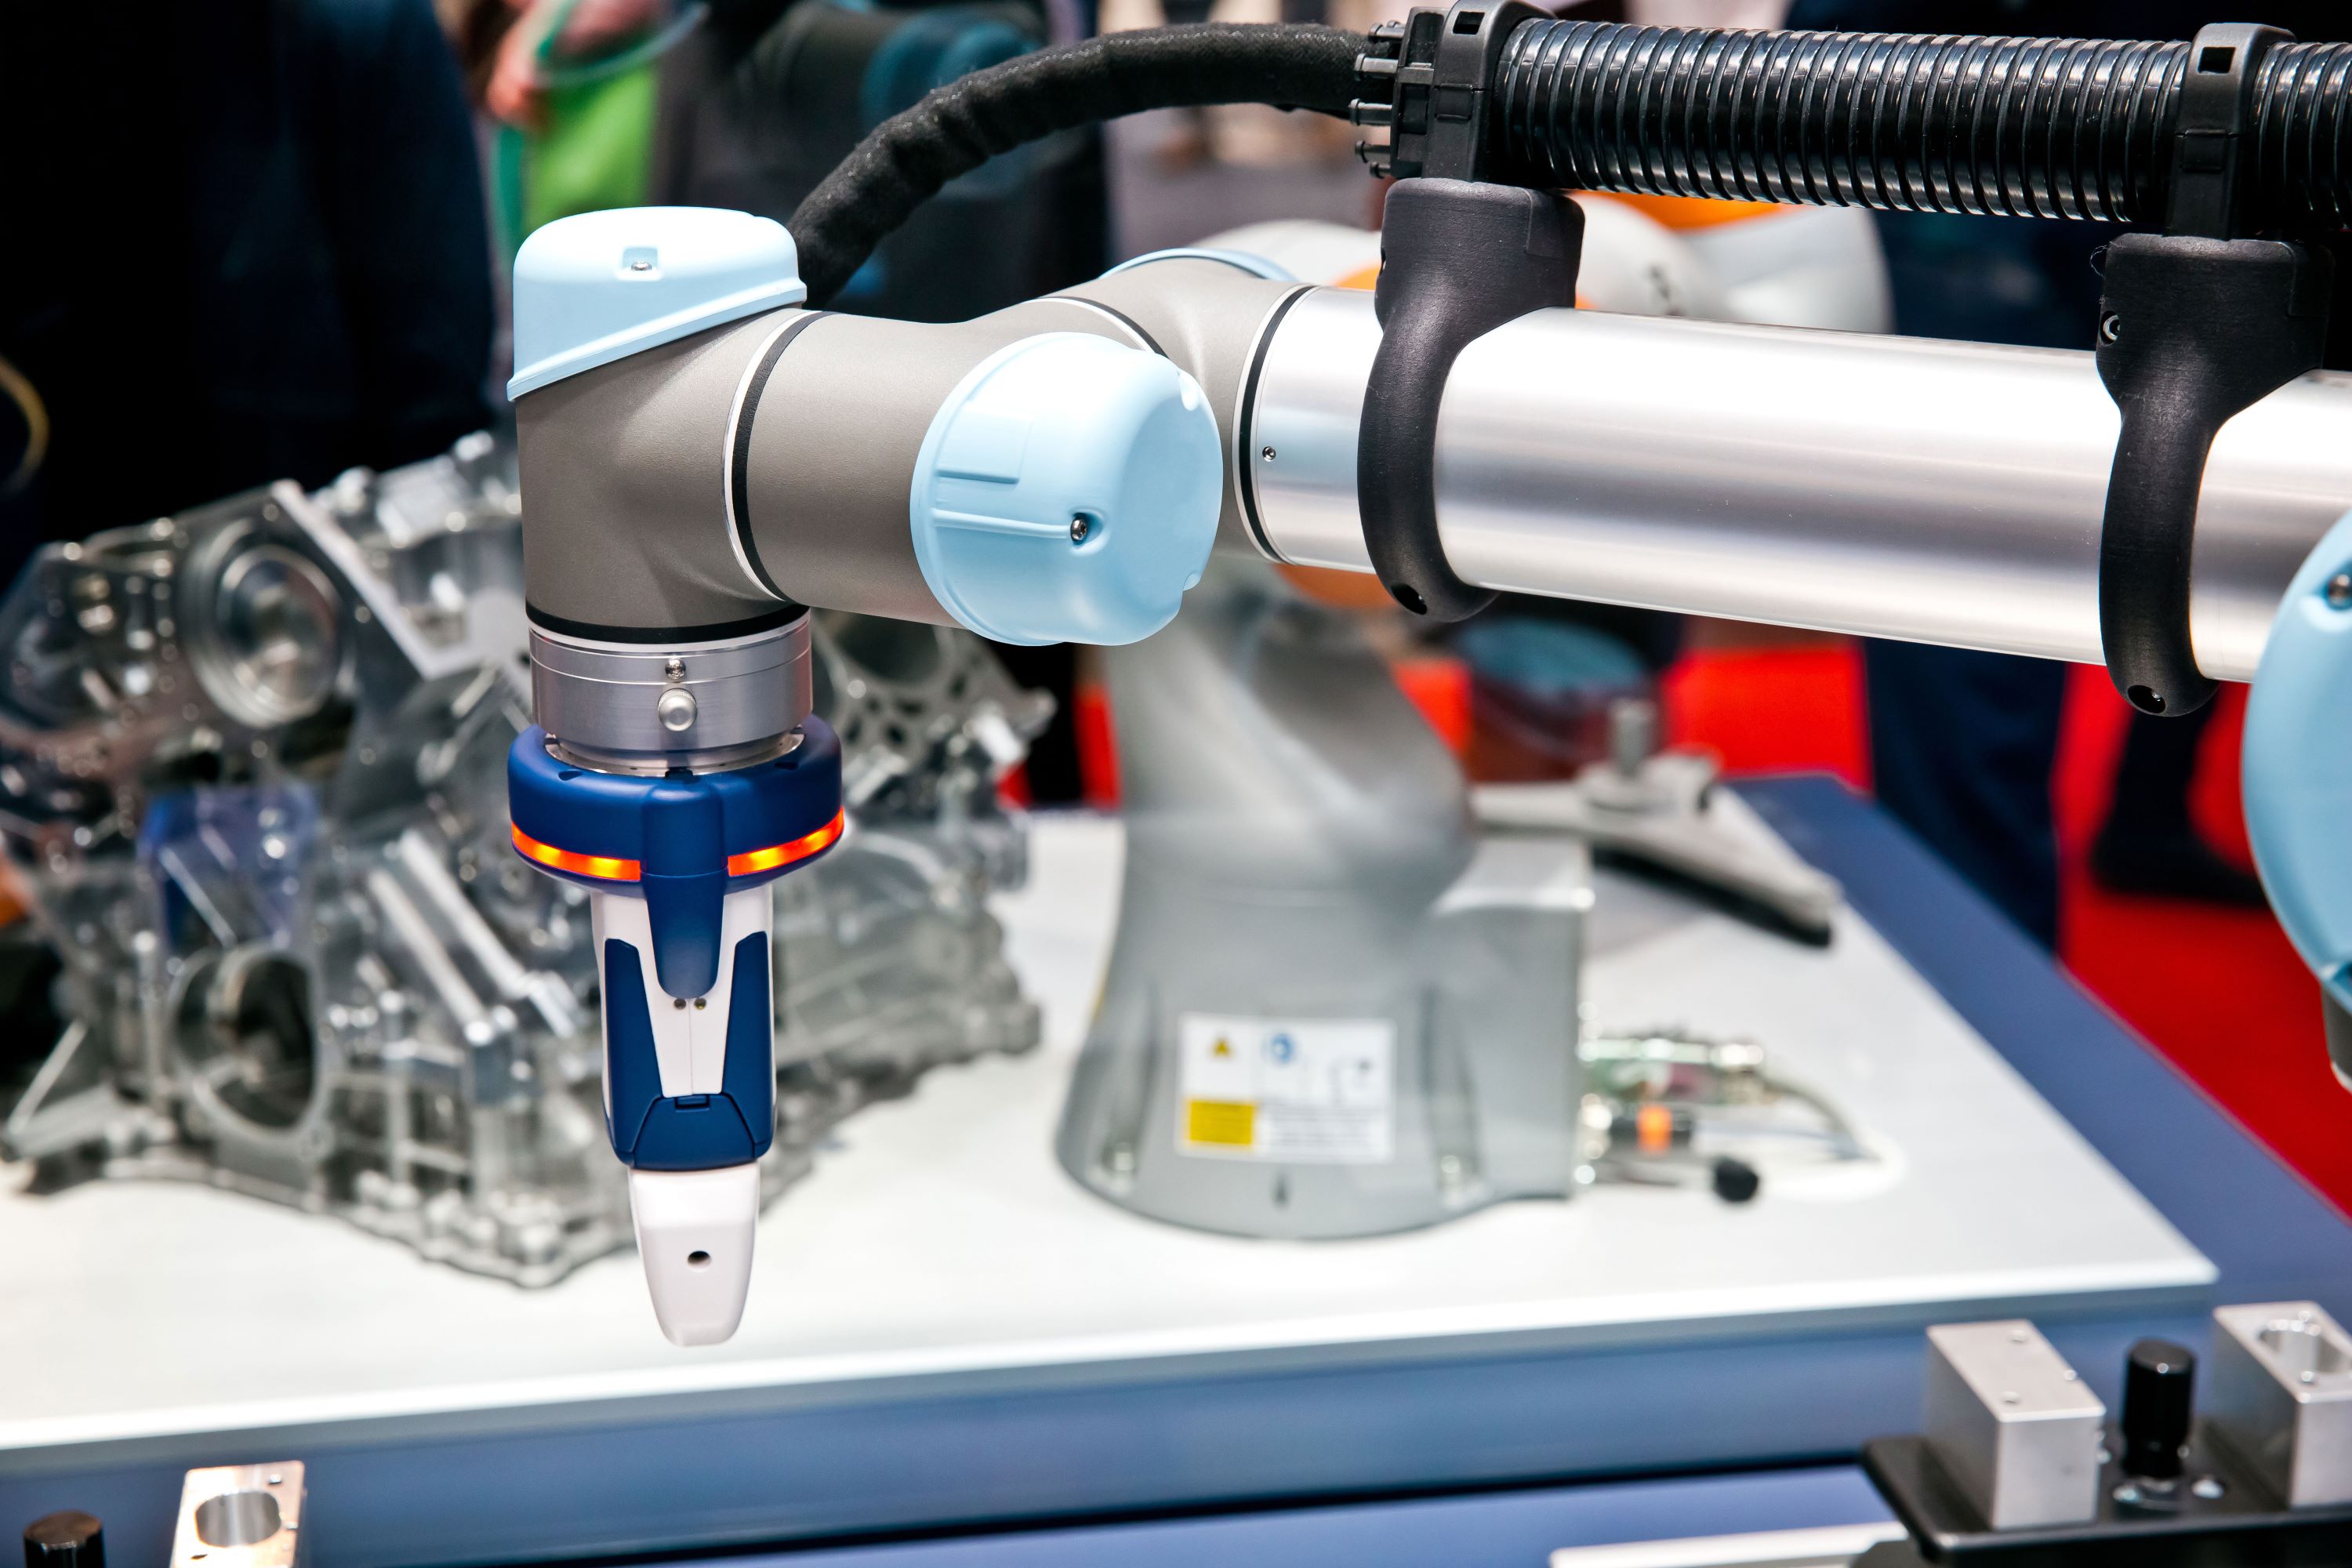 A silver and blue Universal robot arm with a custom gripper.